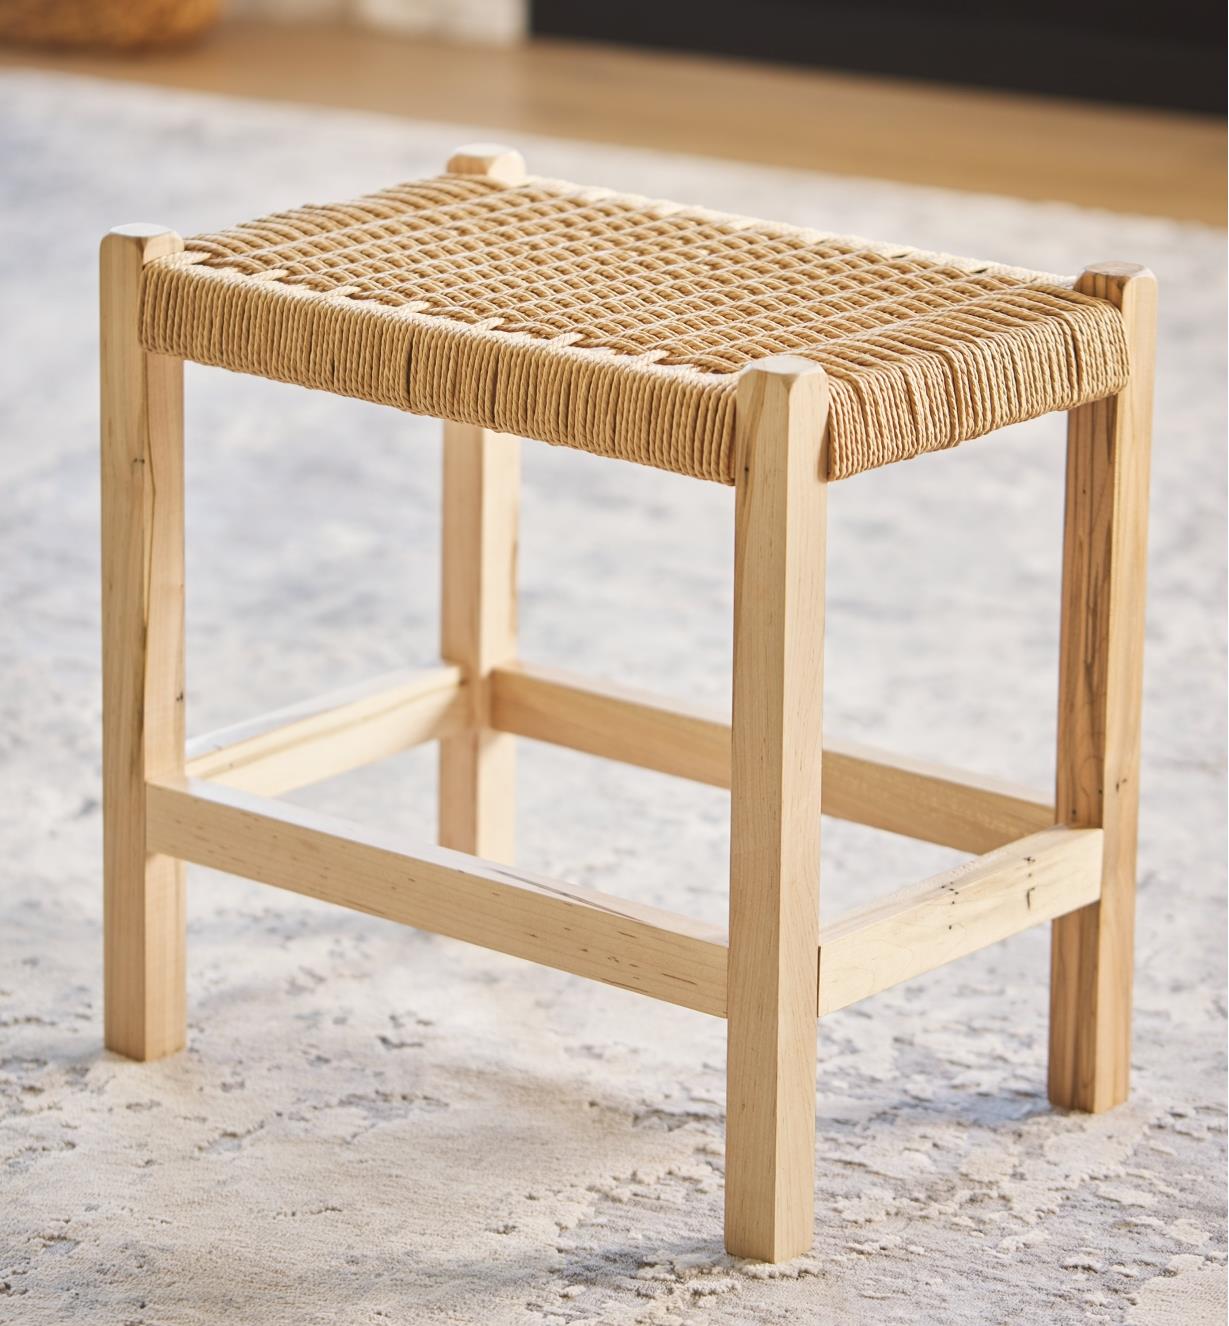 Sample of a completed Danish cord stool